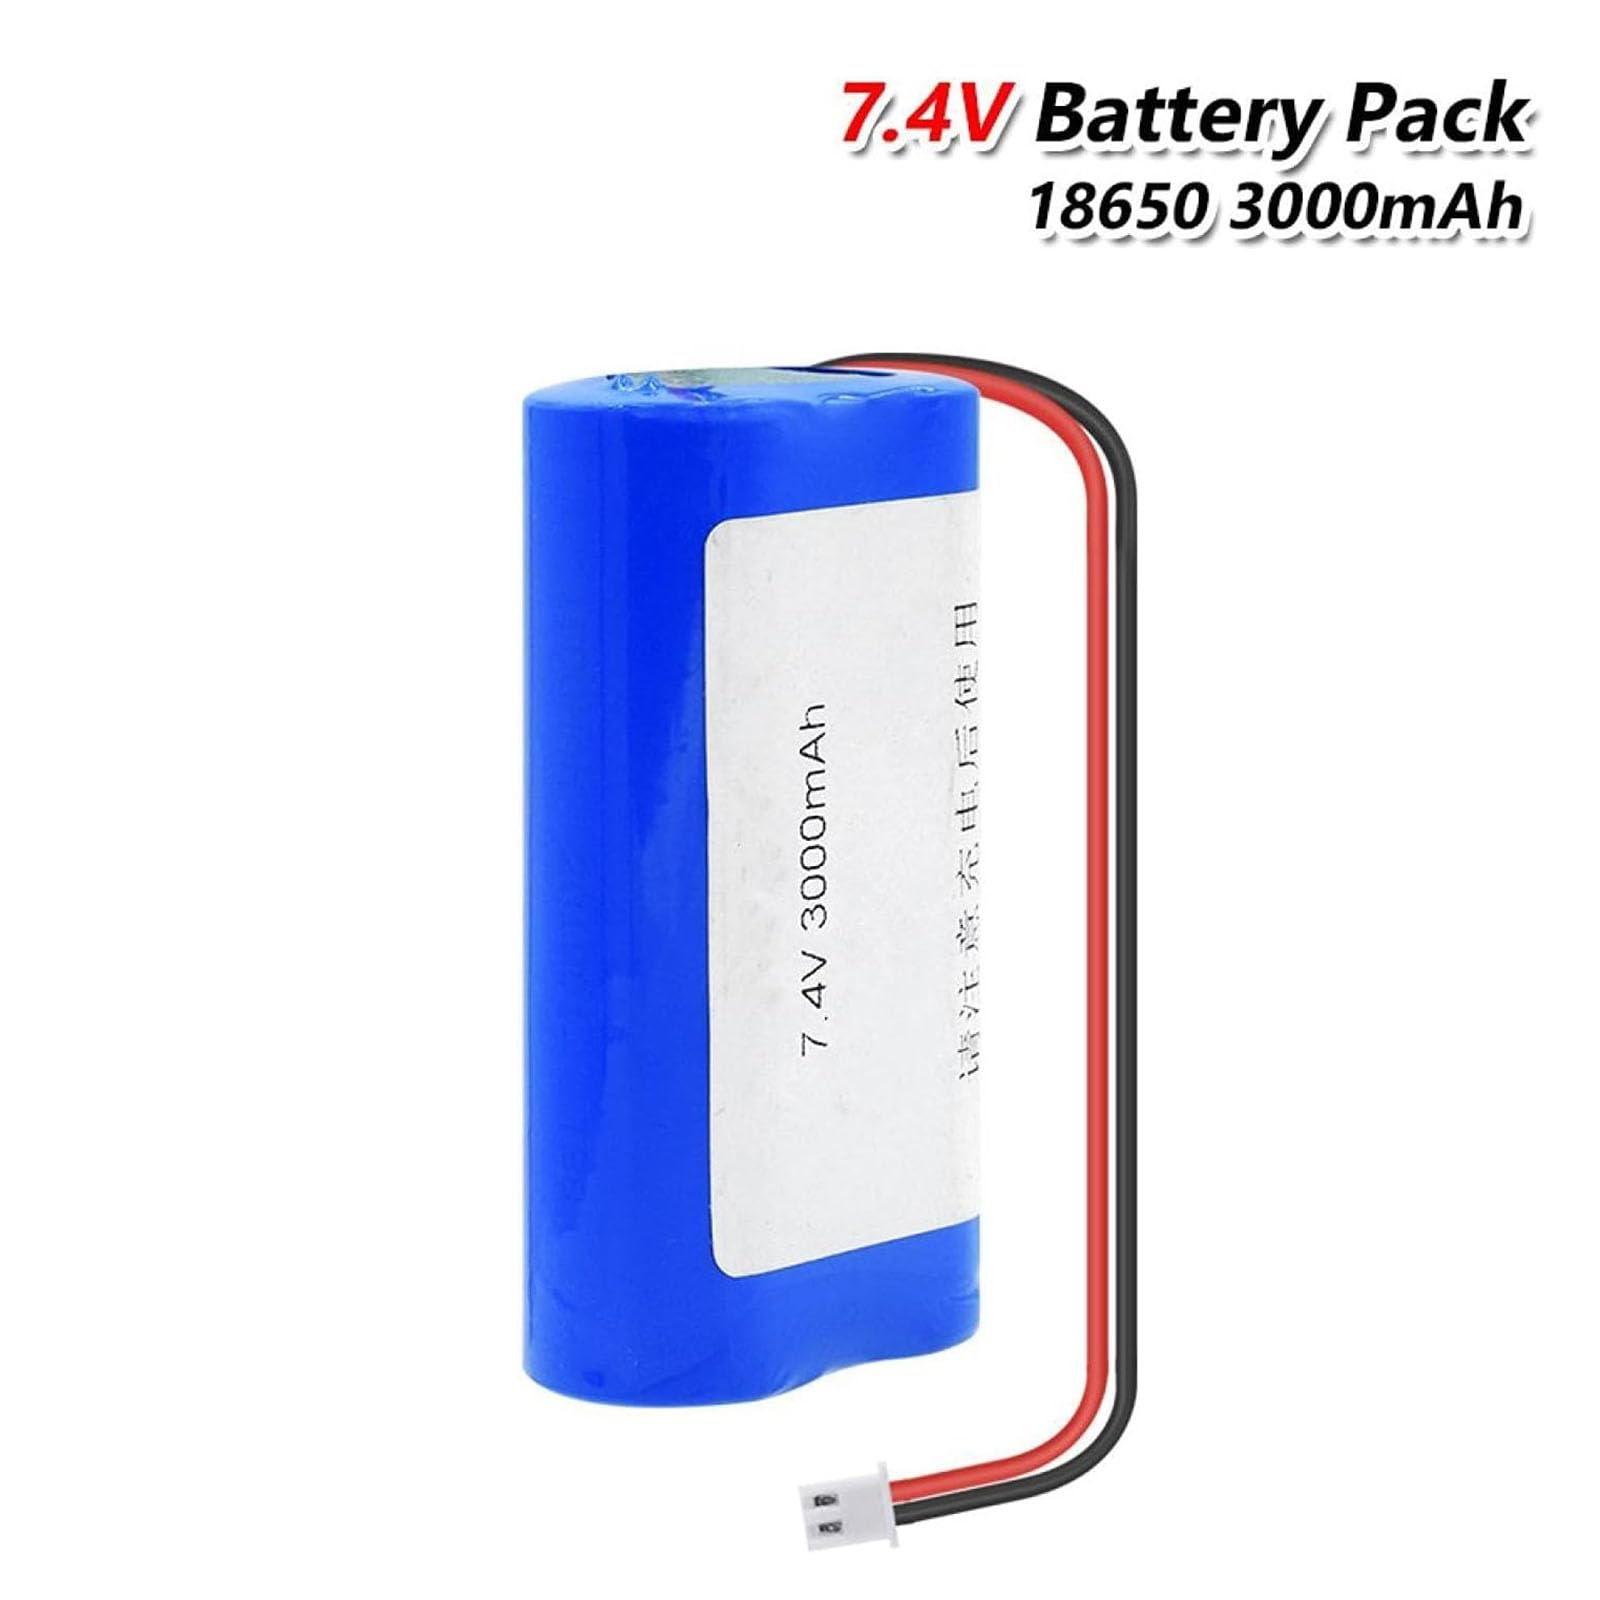 CSTAL 7.4V 3000Mah Lithium Battery Pack, High Performance Backup Battery with XH2.54 Connector, for DIY Power Bank Remote Control Flashlight